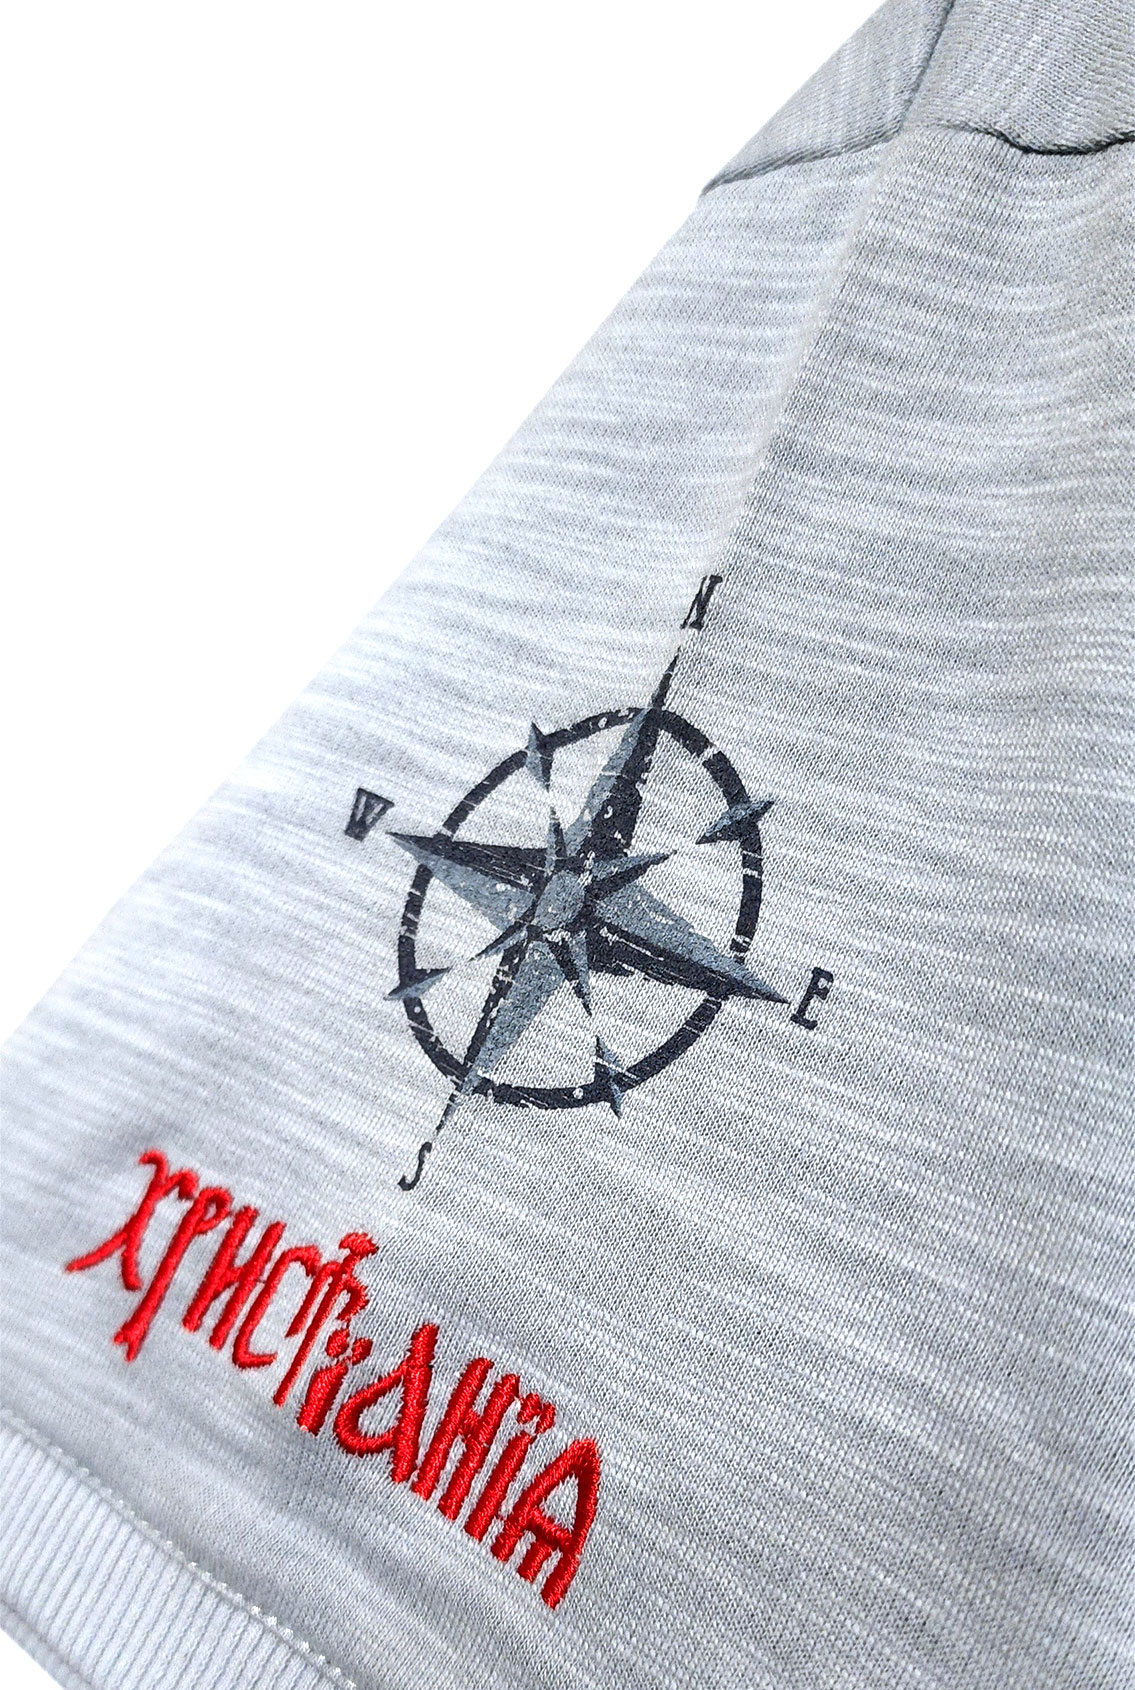 Gray men's T-shirt with anchor